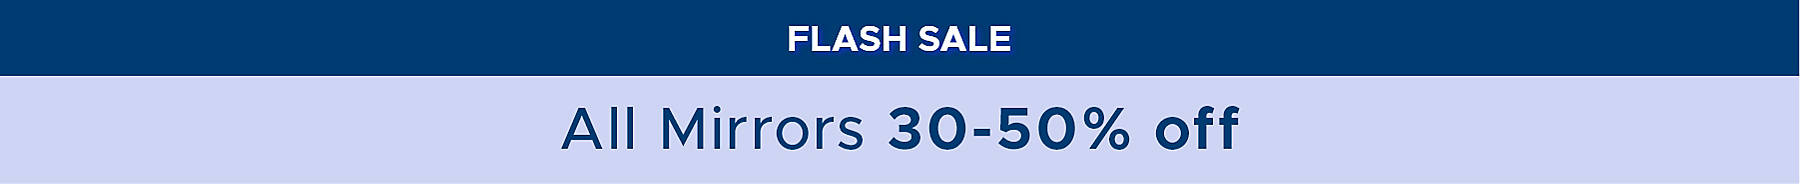 Flash Sale All Mirrors 30-50% off